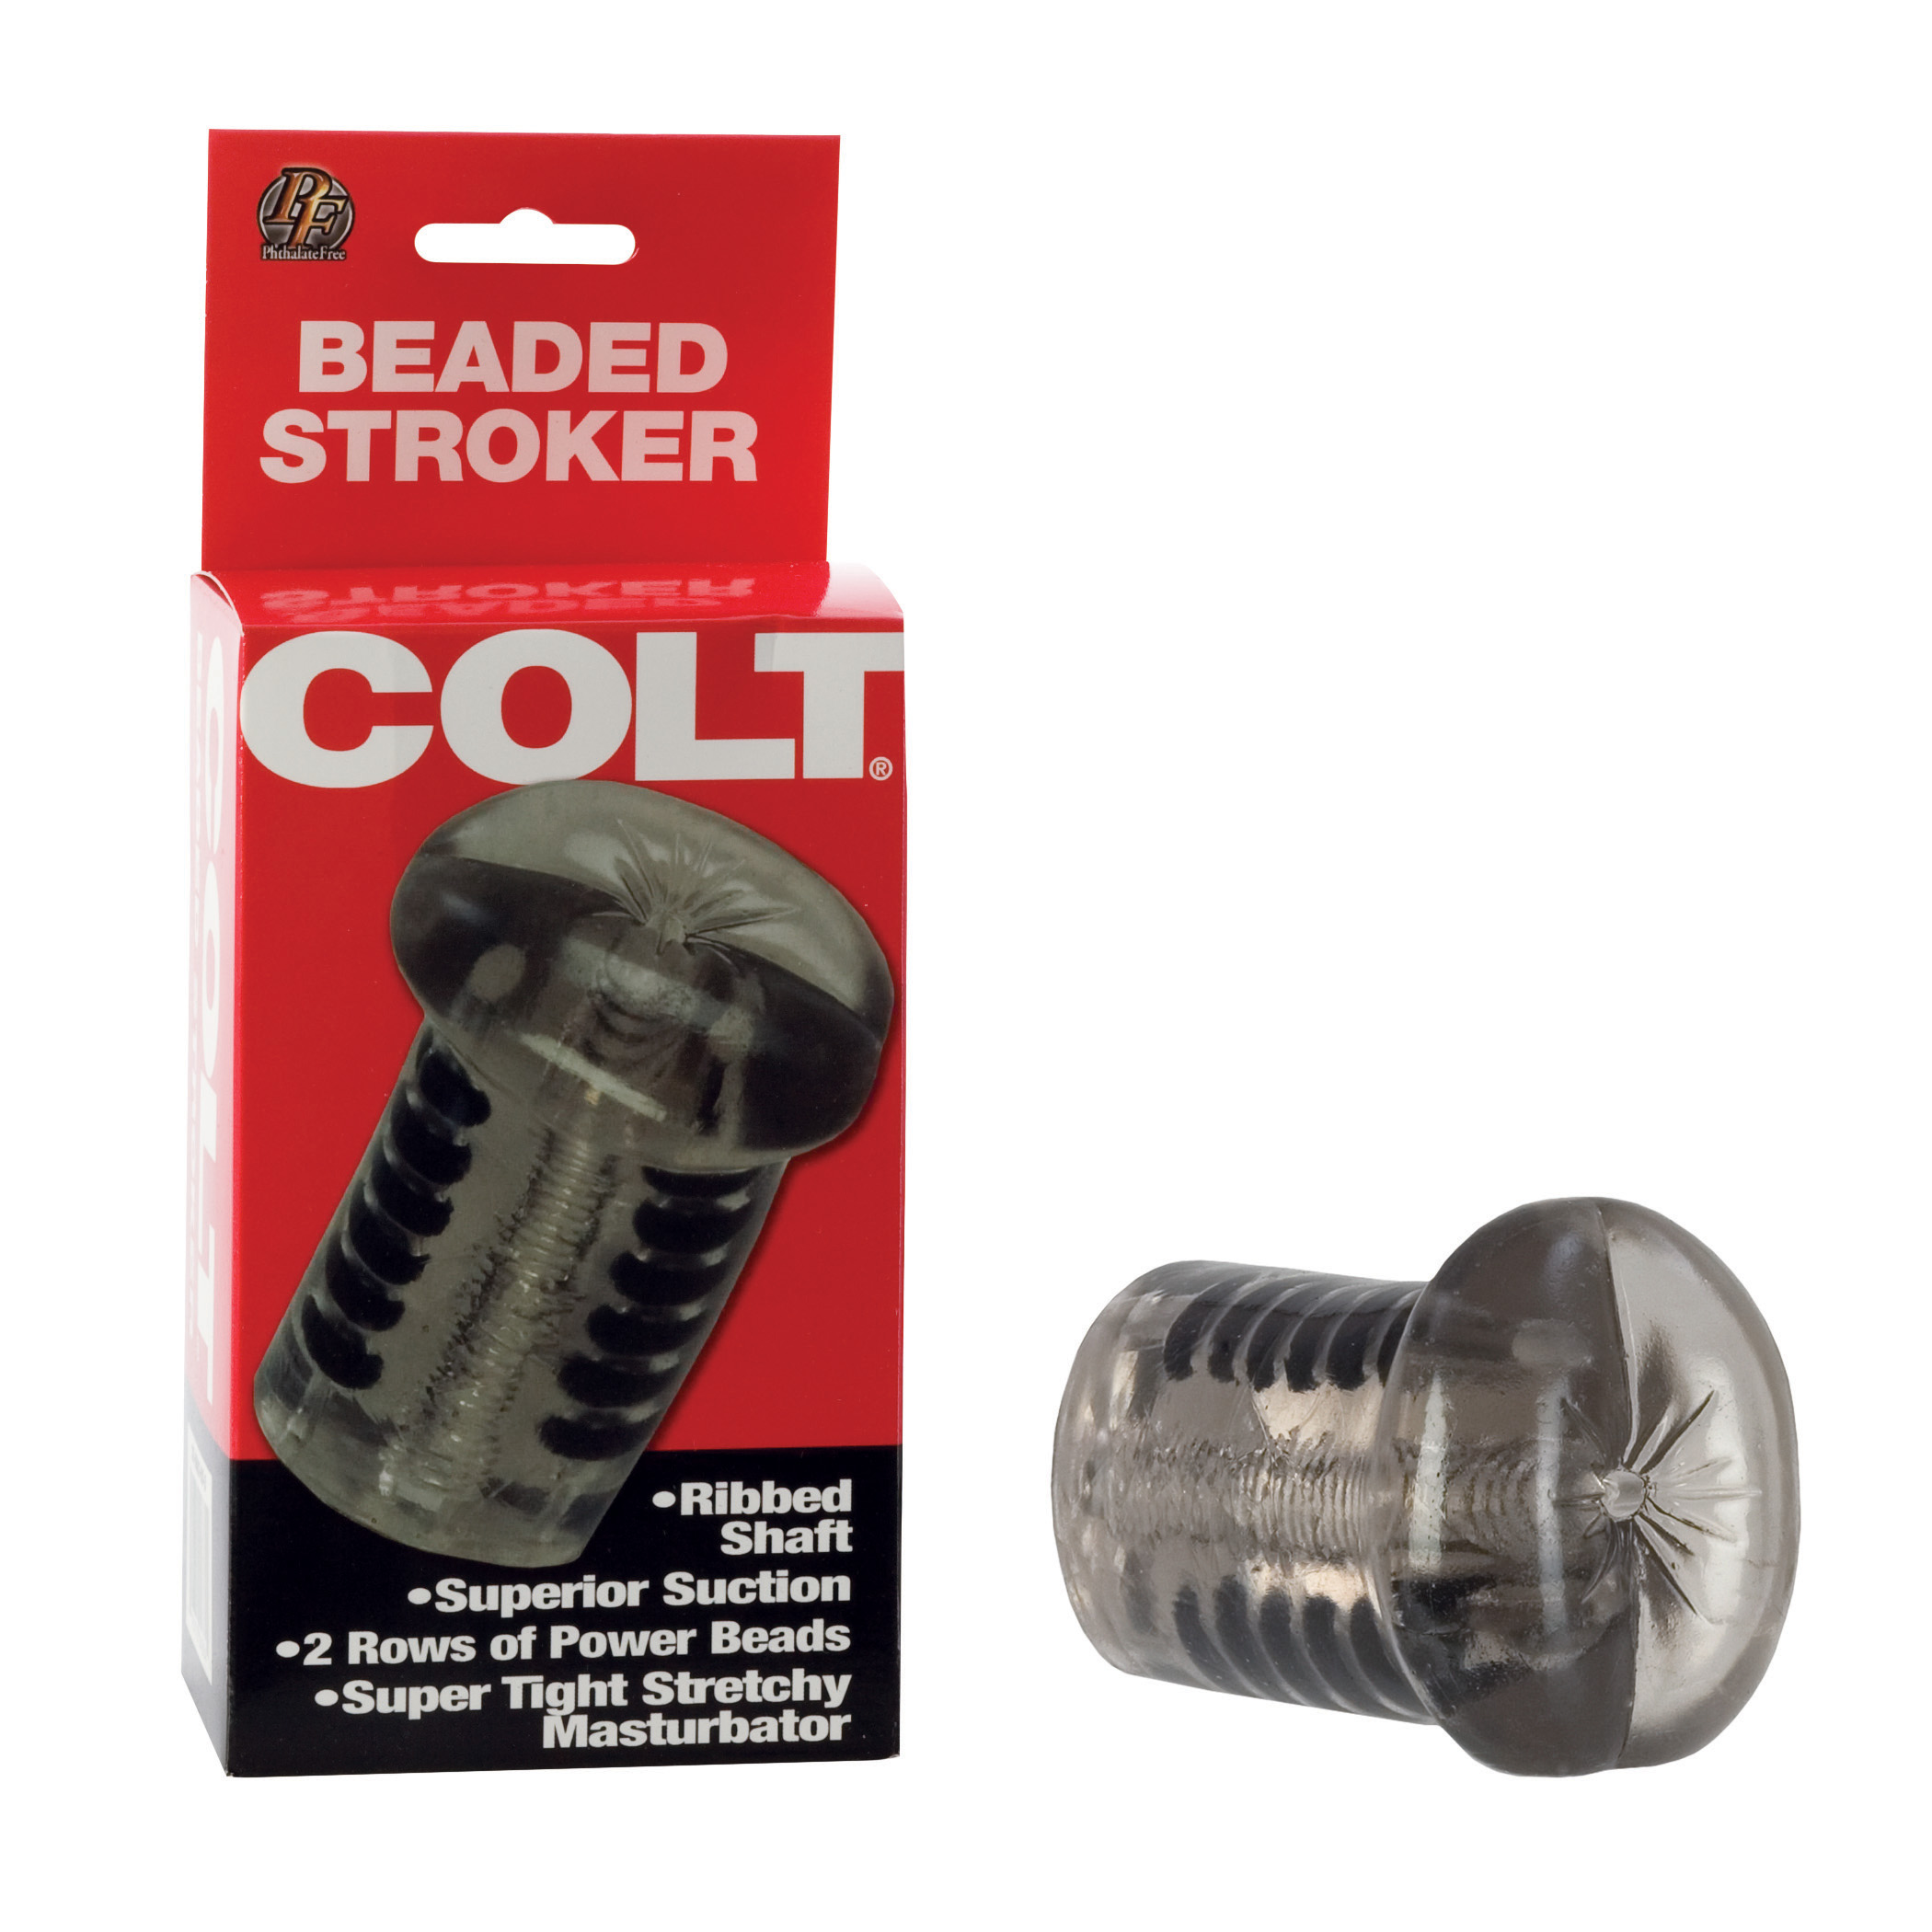 COLT BEADED STROKER - Click Image to Close